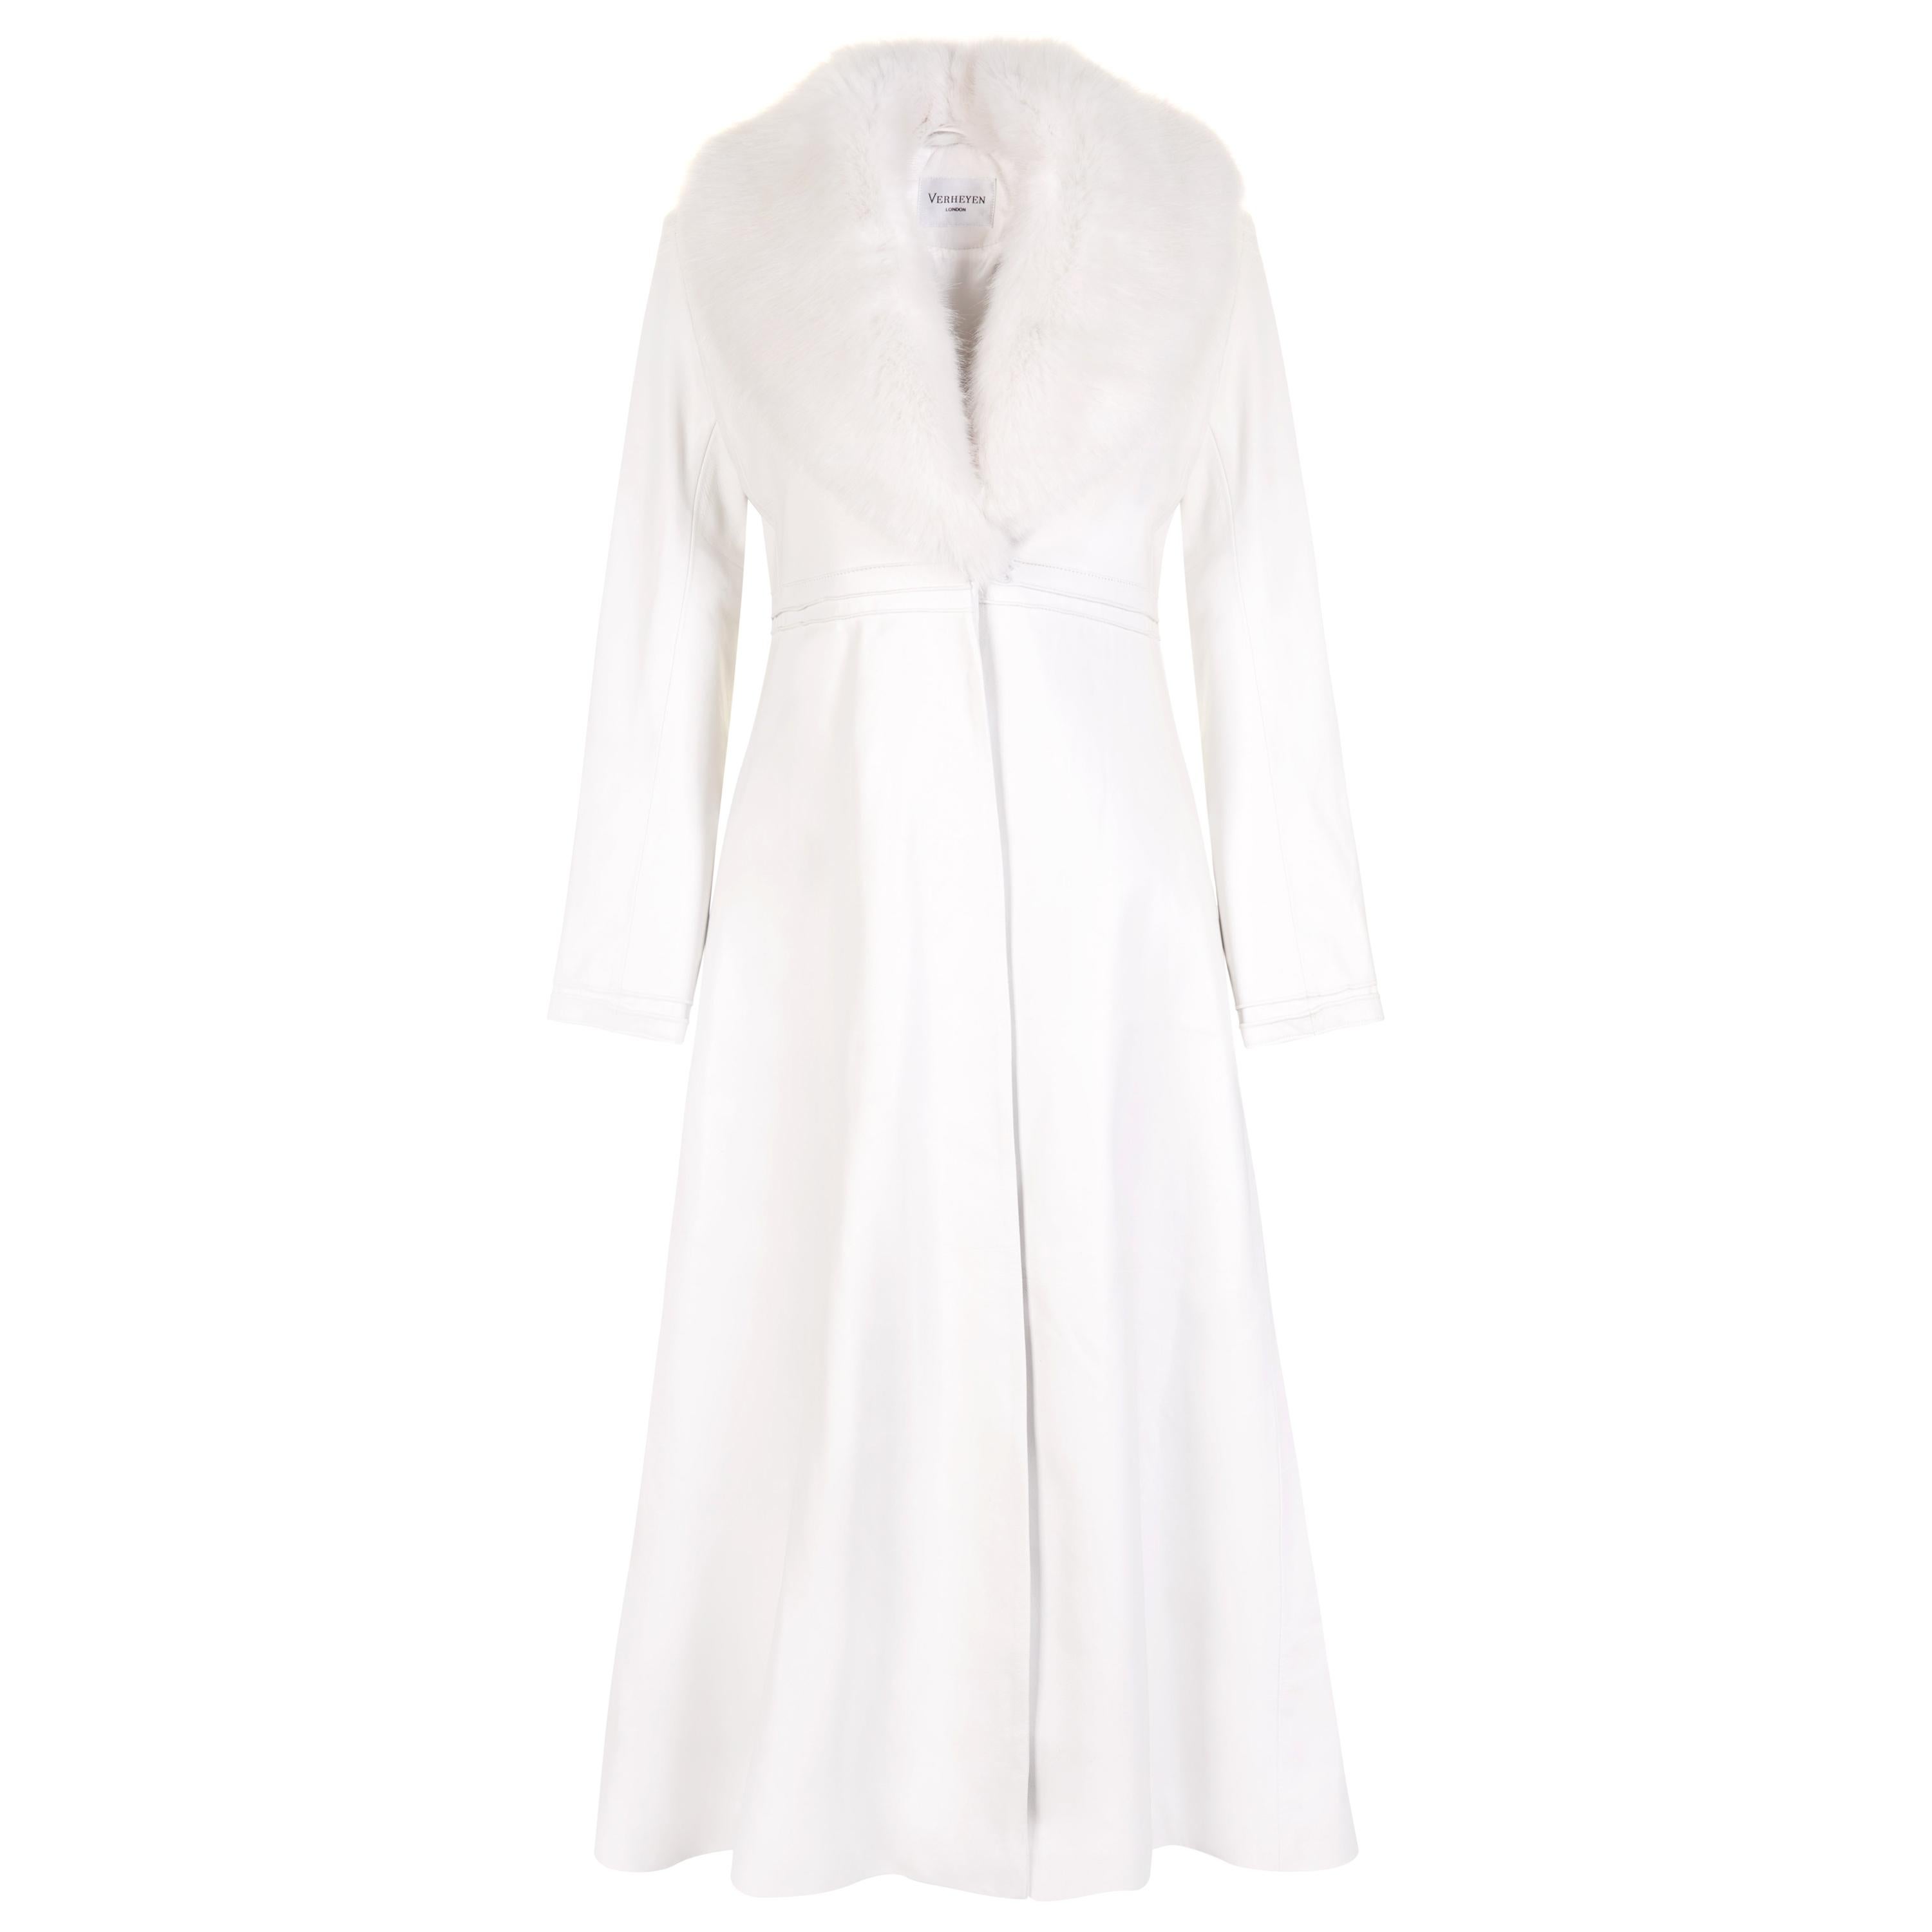 Verheyen London Edward Leather Coat in White with Faux Fur- Size uk 12

The Edward Leather Coat created by Verheyen London is a romantic design inspired by the 1970s and Edwardian Era of Fashion.  A timeless design to be be worn for a lifetime and